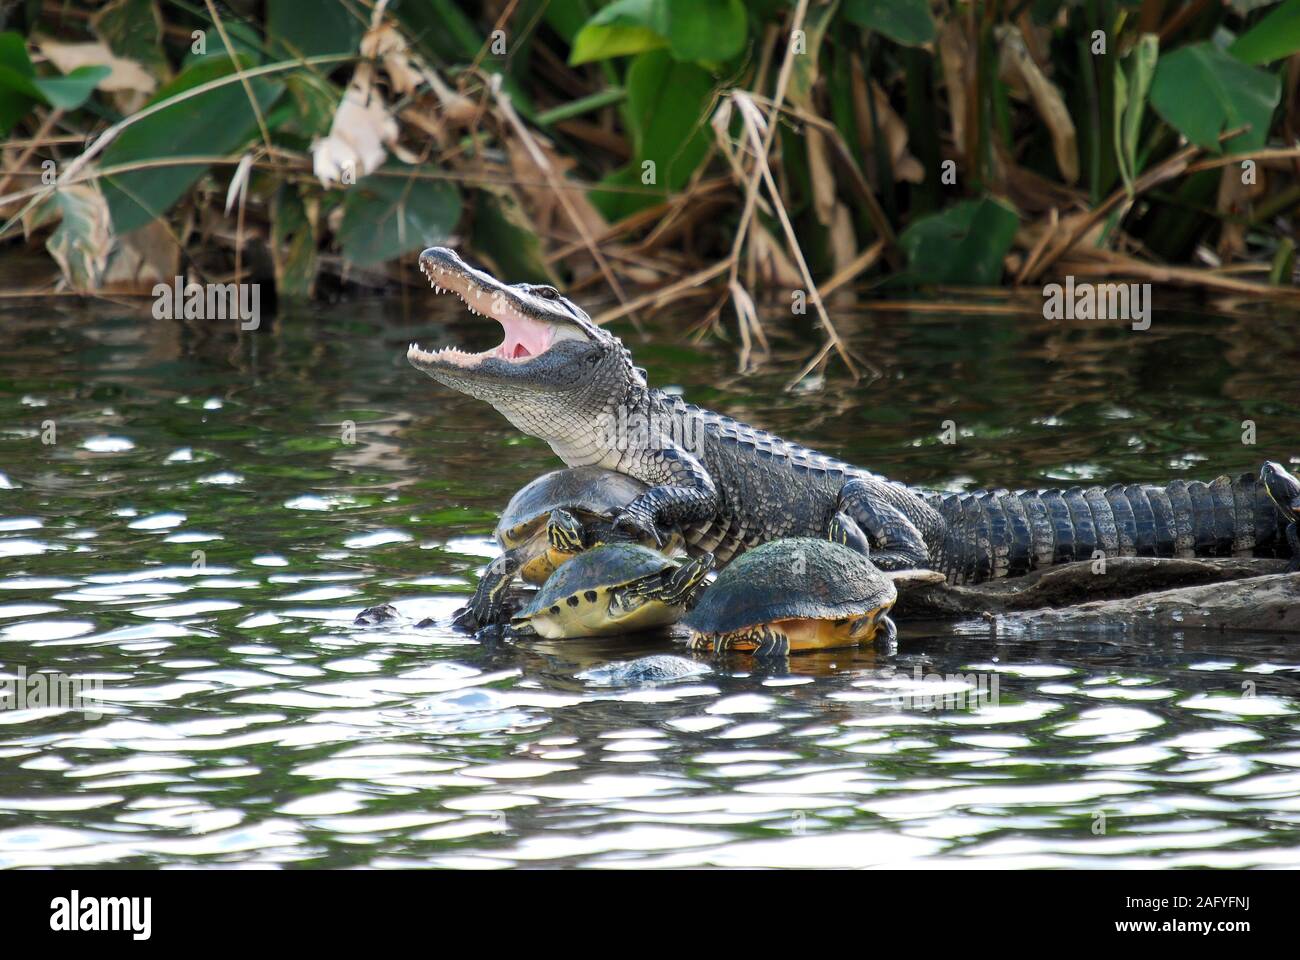 The Alligator and the Turtle Stock Photo